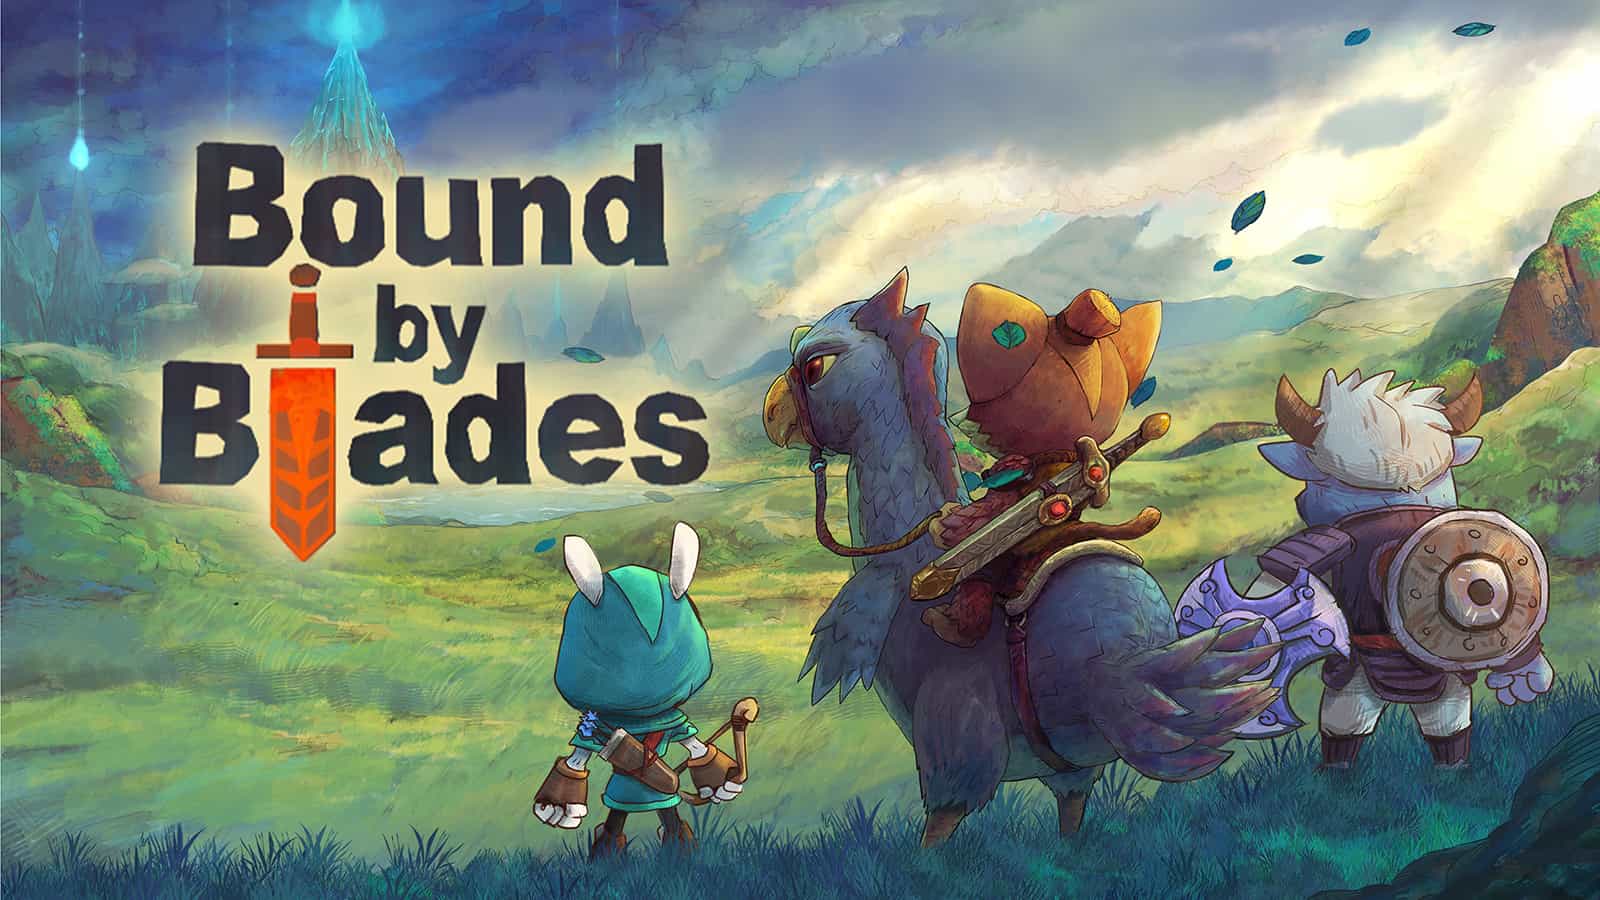 Bound By Blades Is A Boss Rush RPG Launching On PC This Year, Switch In 2023